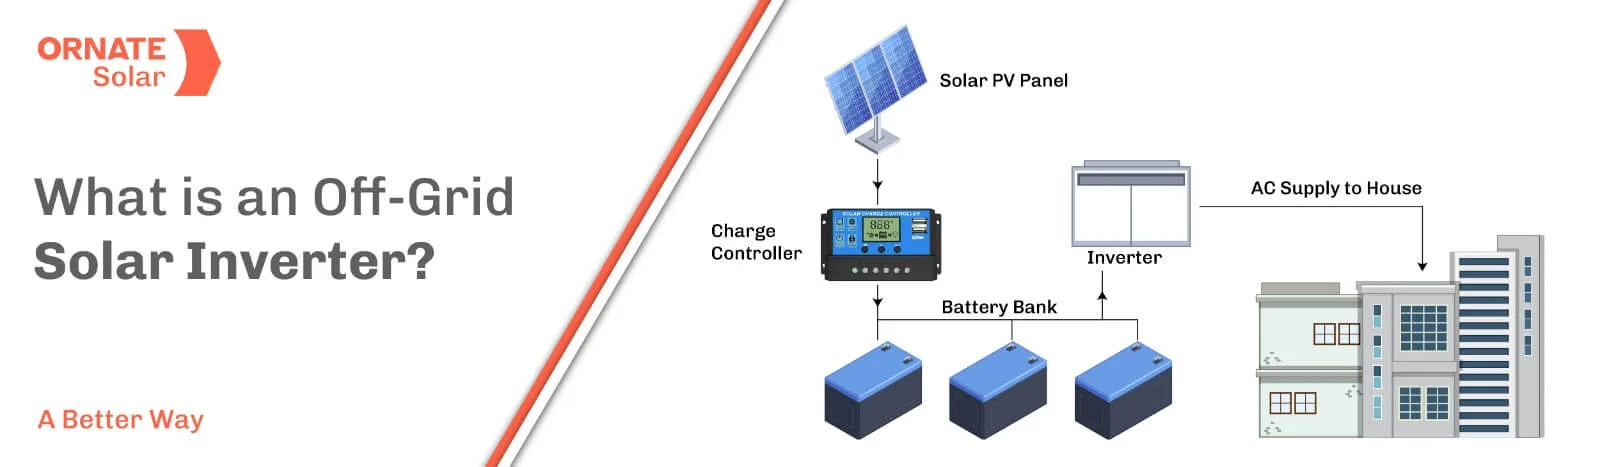 What is an Off-Grid Solar Inverter?